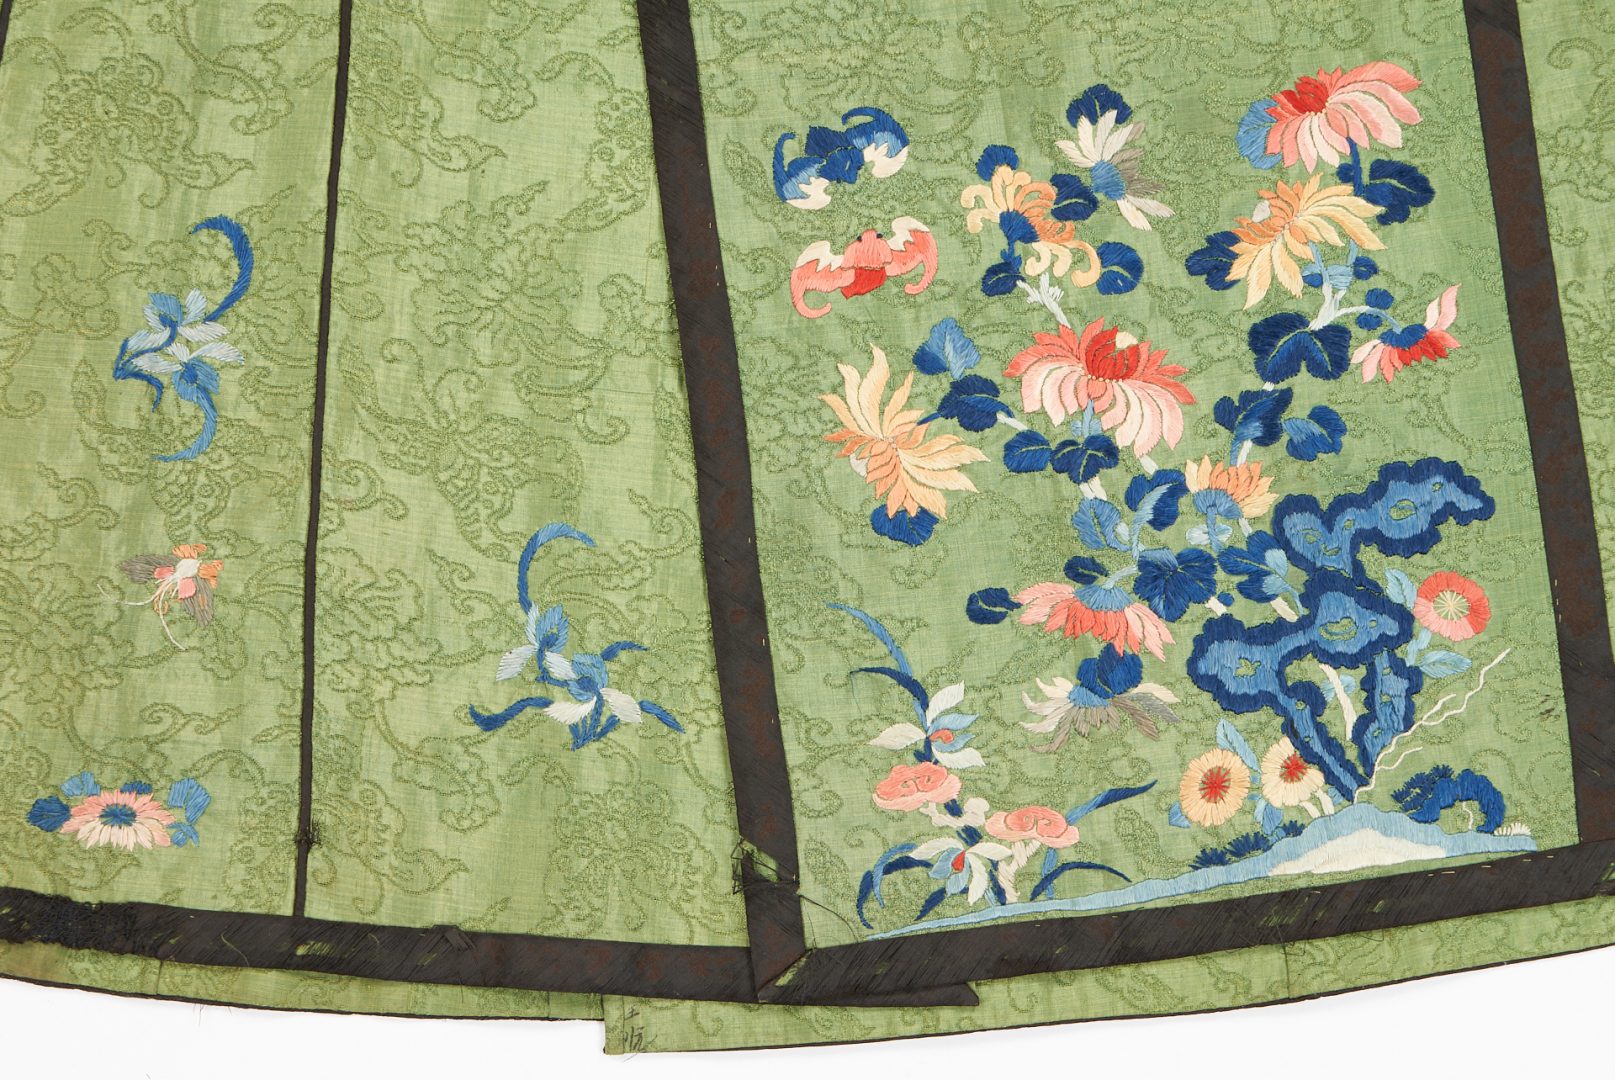 Lot 31: 2 Chinese Floral Silk Wedding Skirts